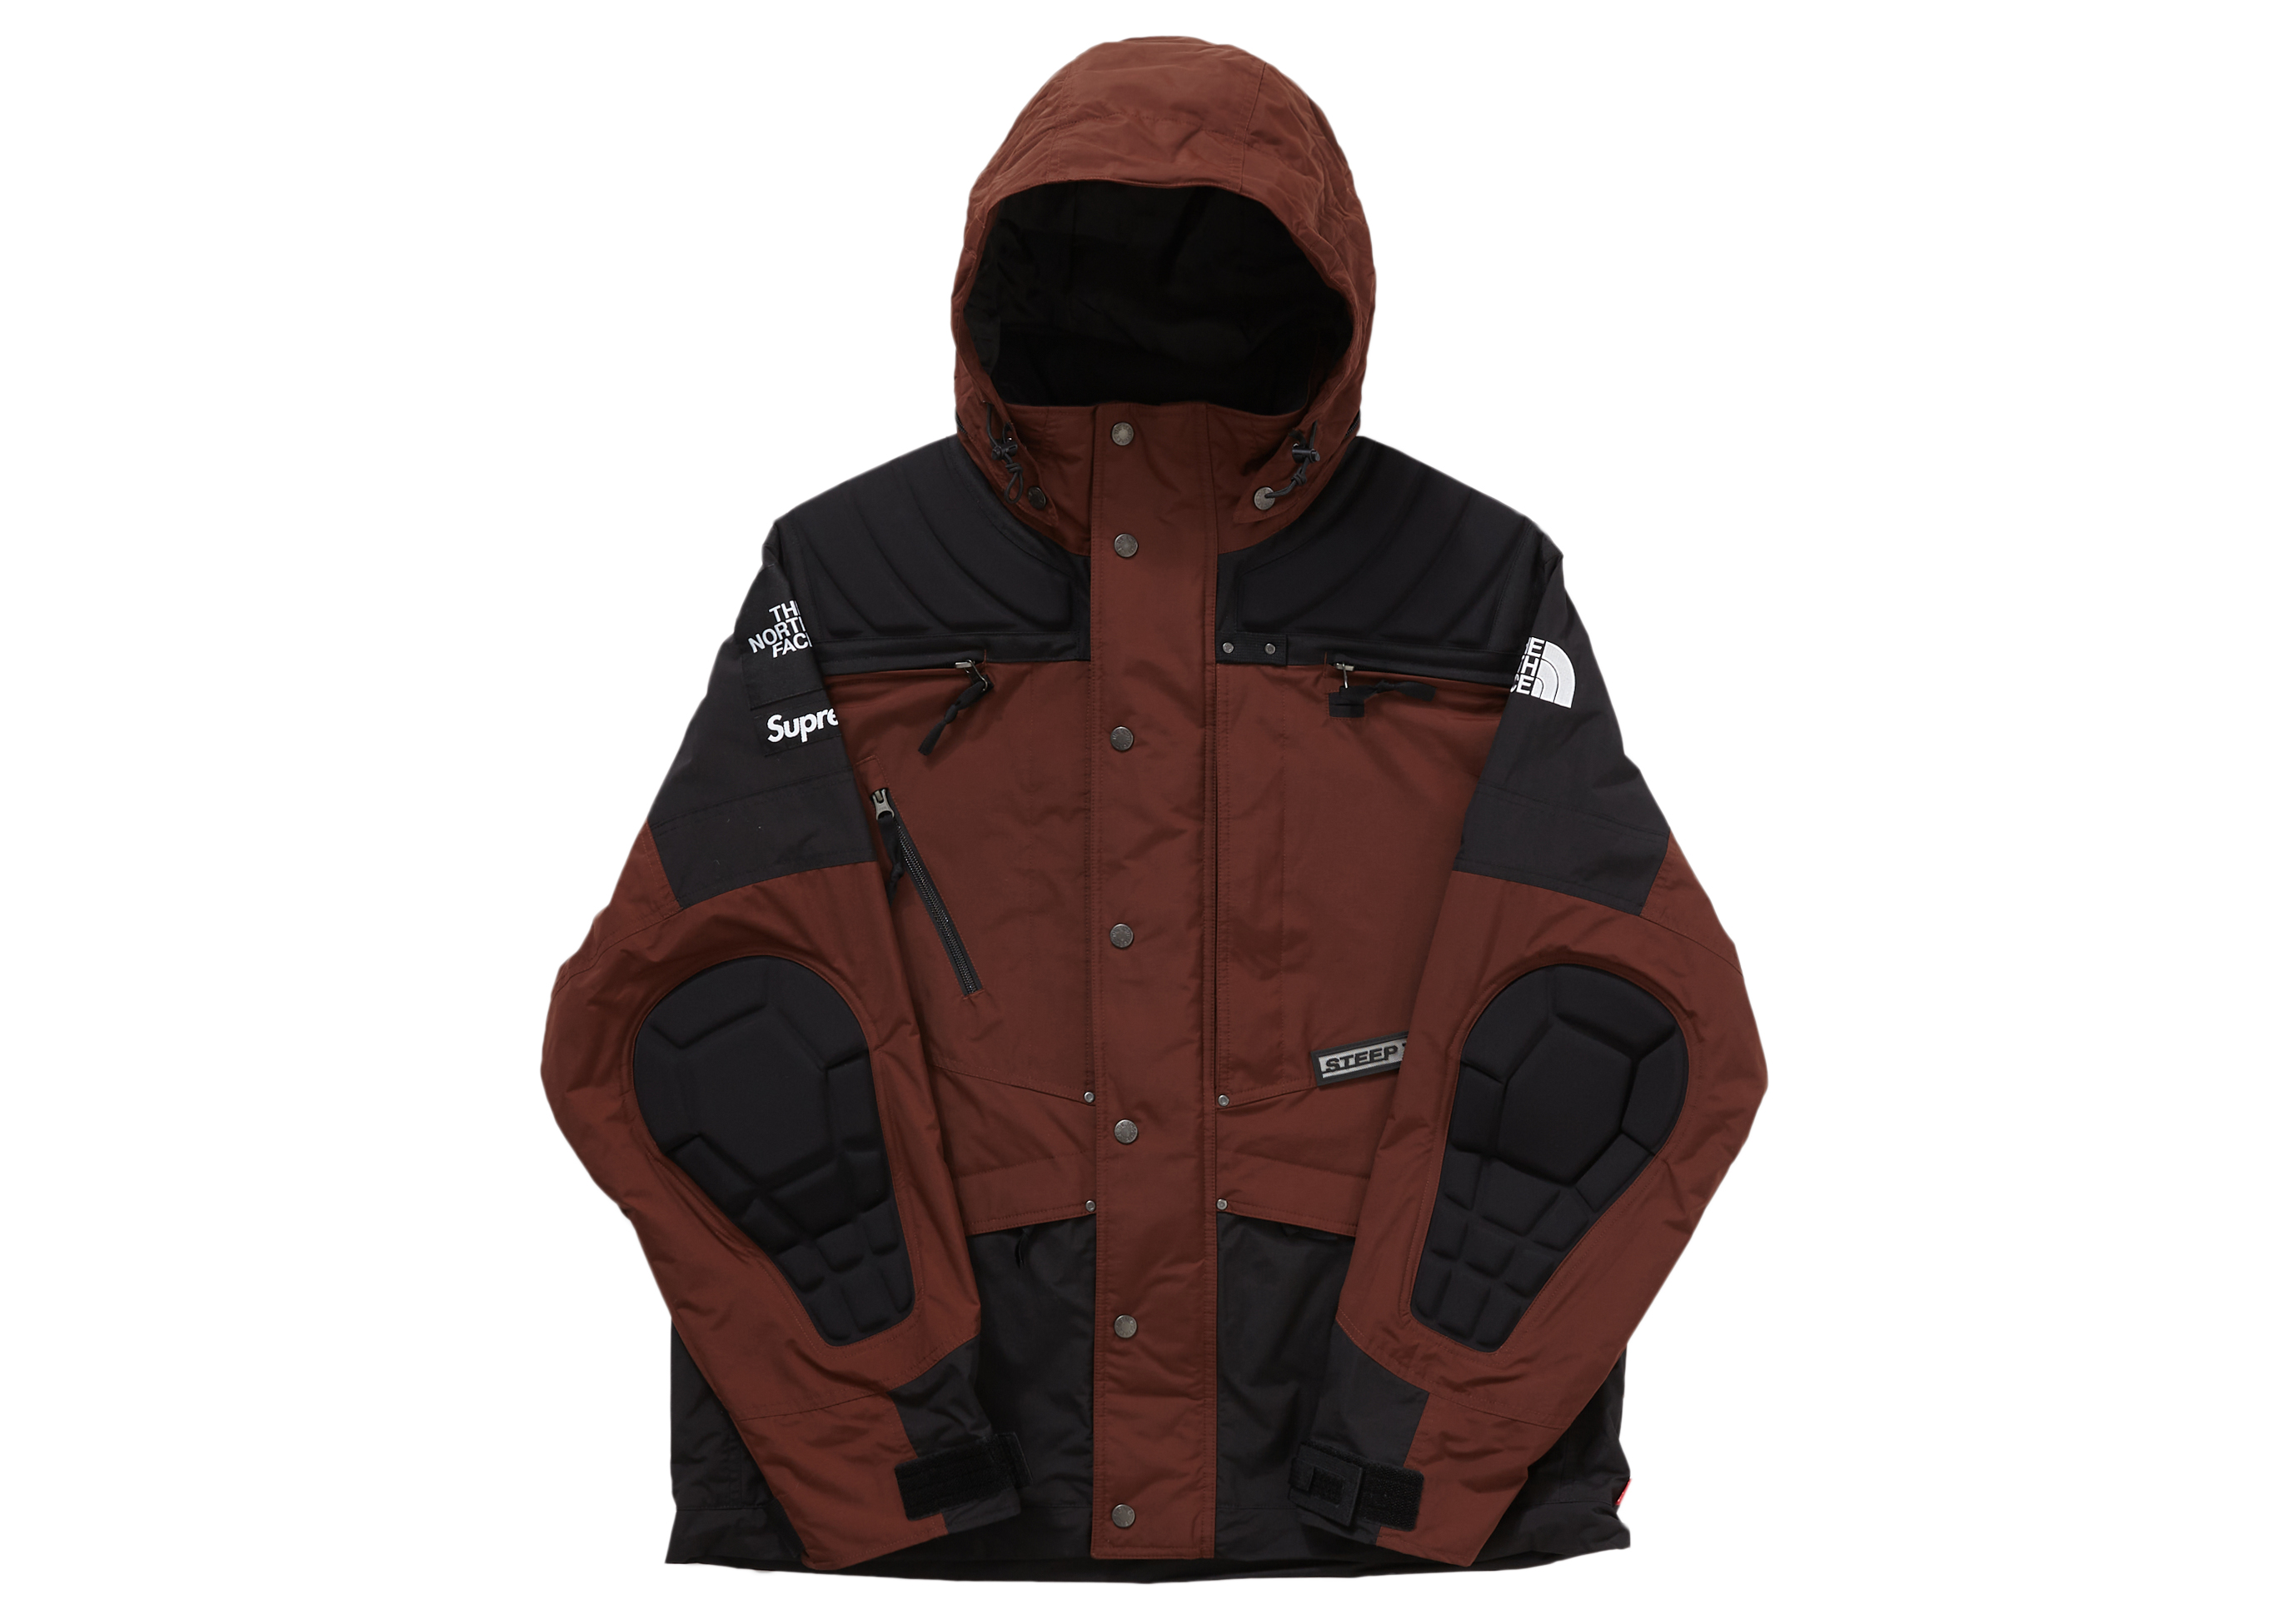 THE NORTH FACE  Steep tech apogee jacket